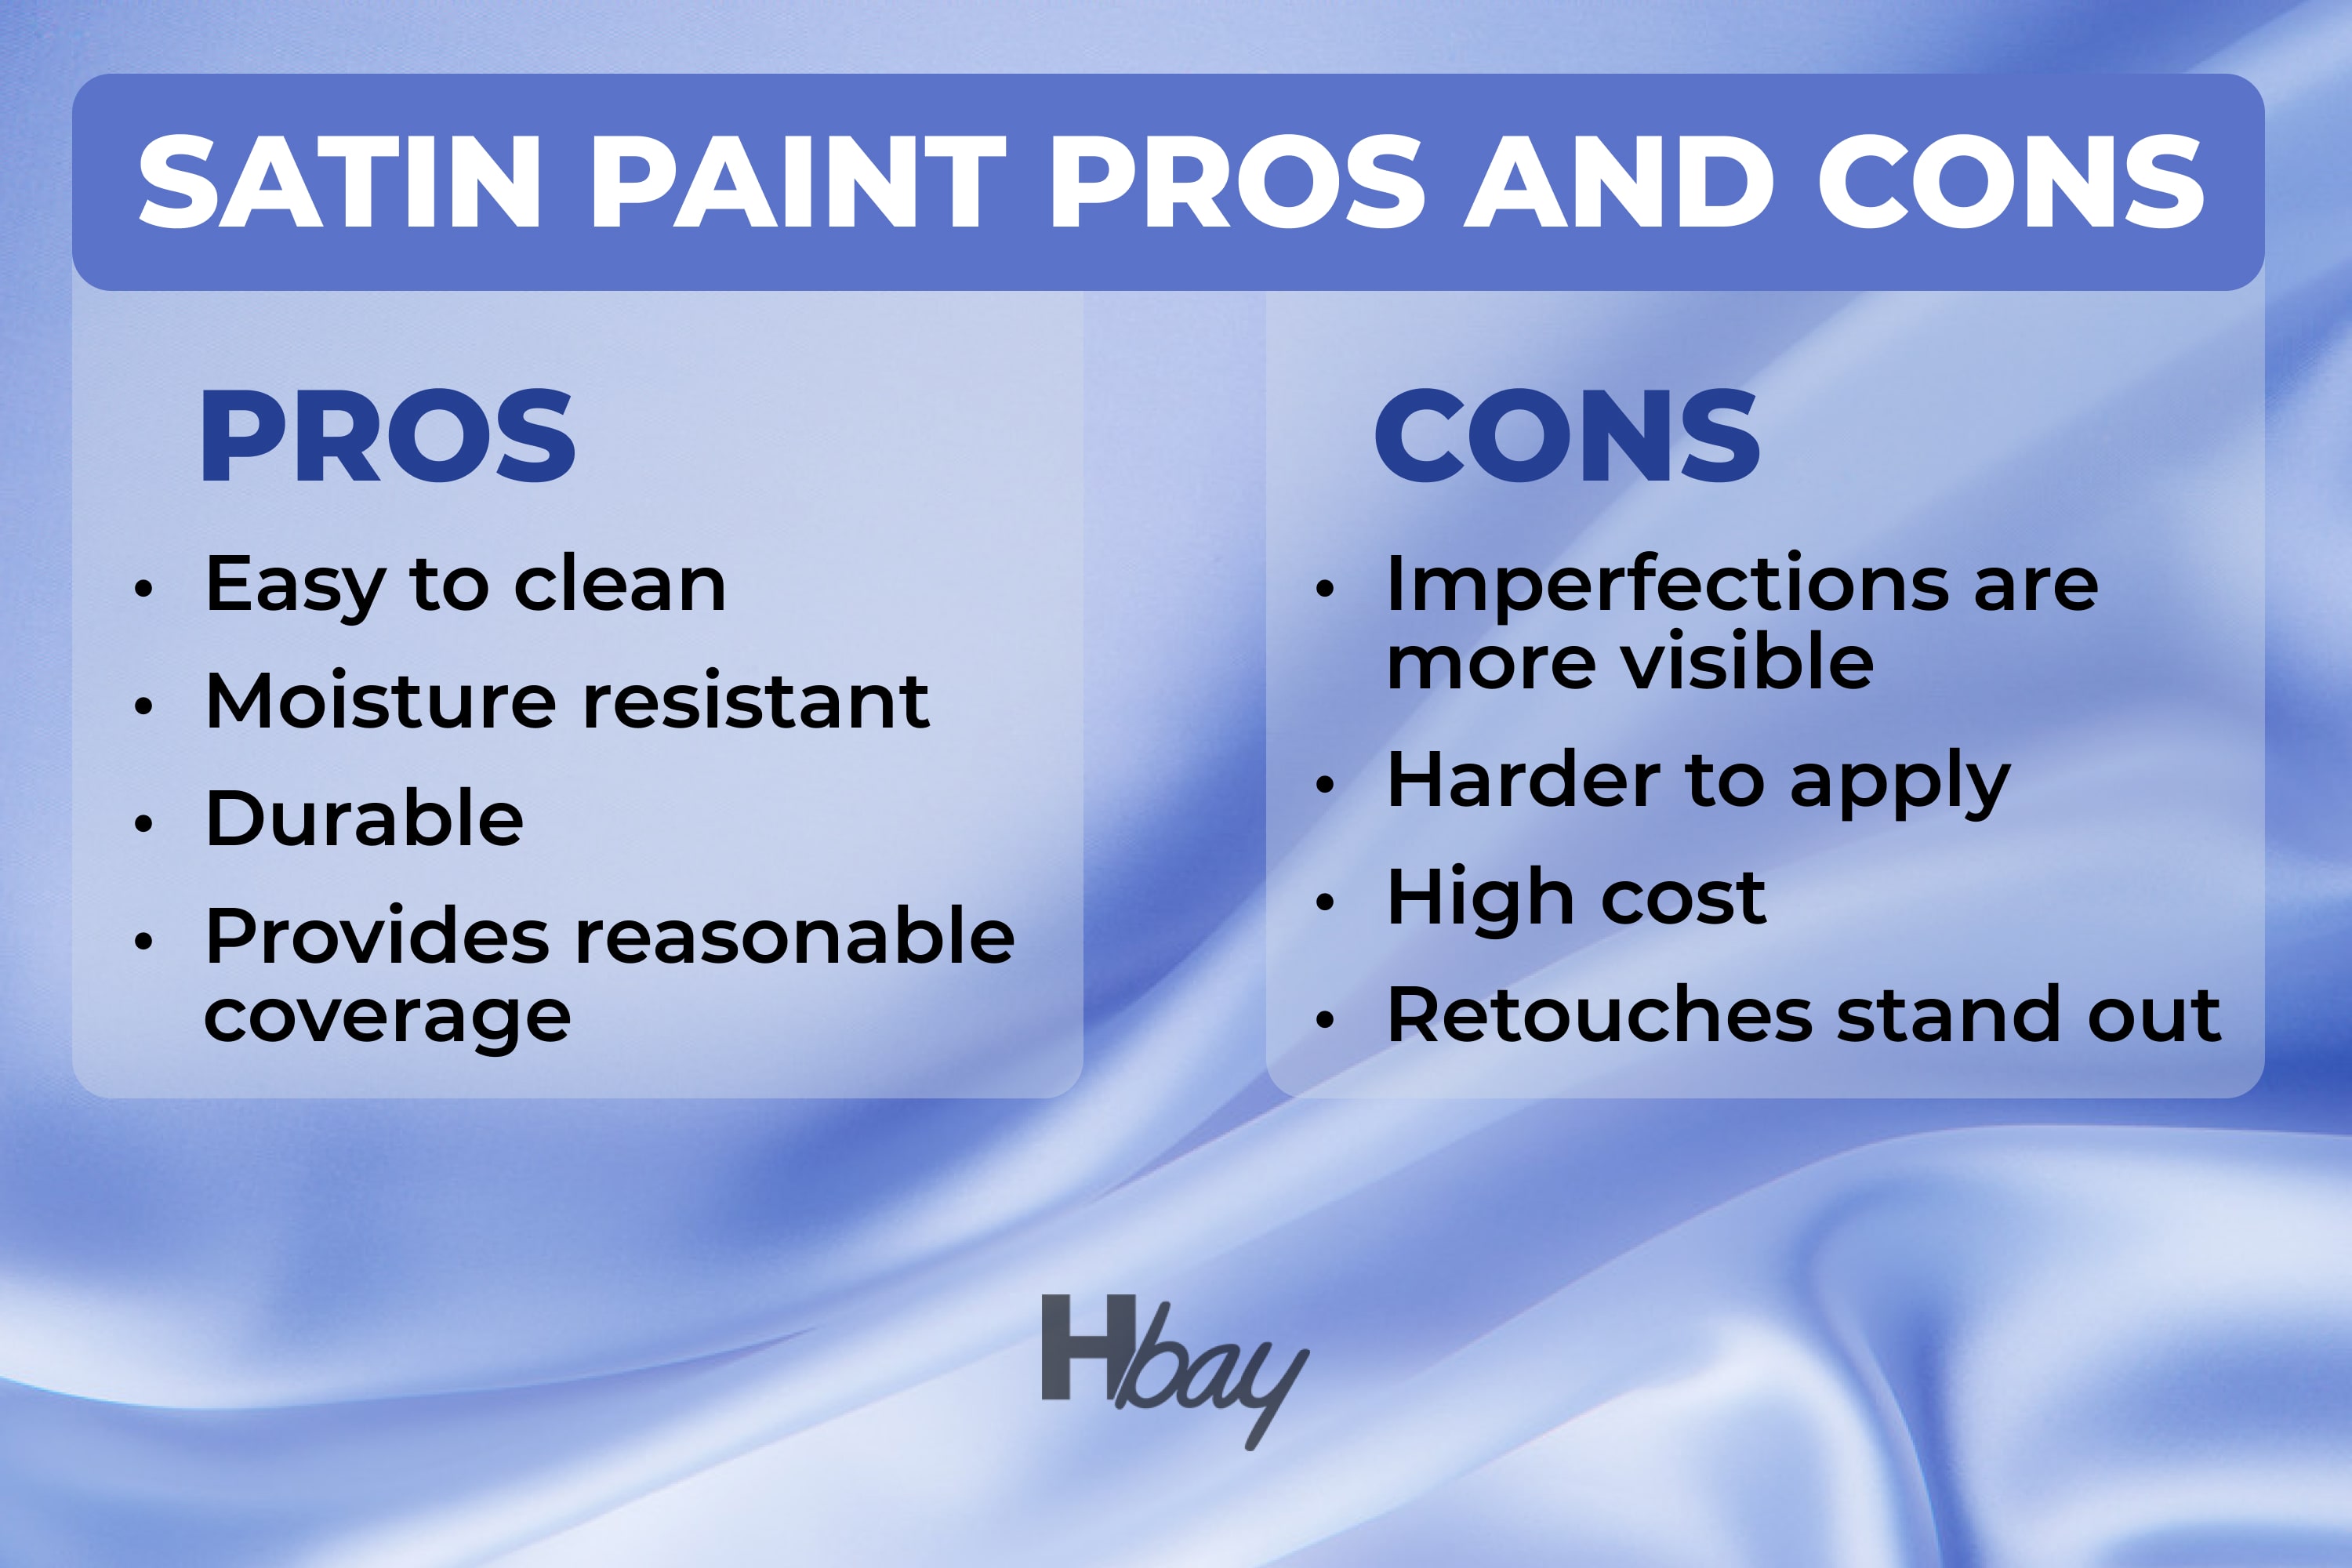 Satin paint pros and cons